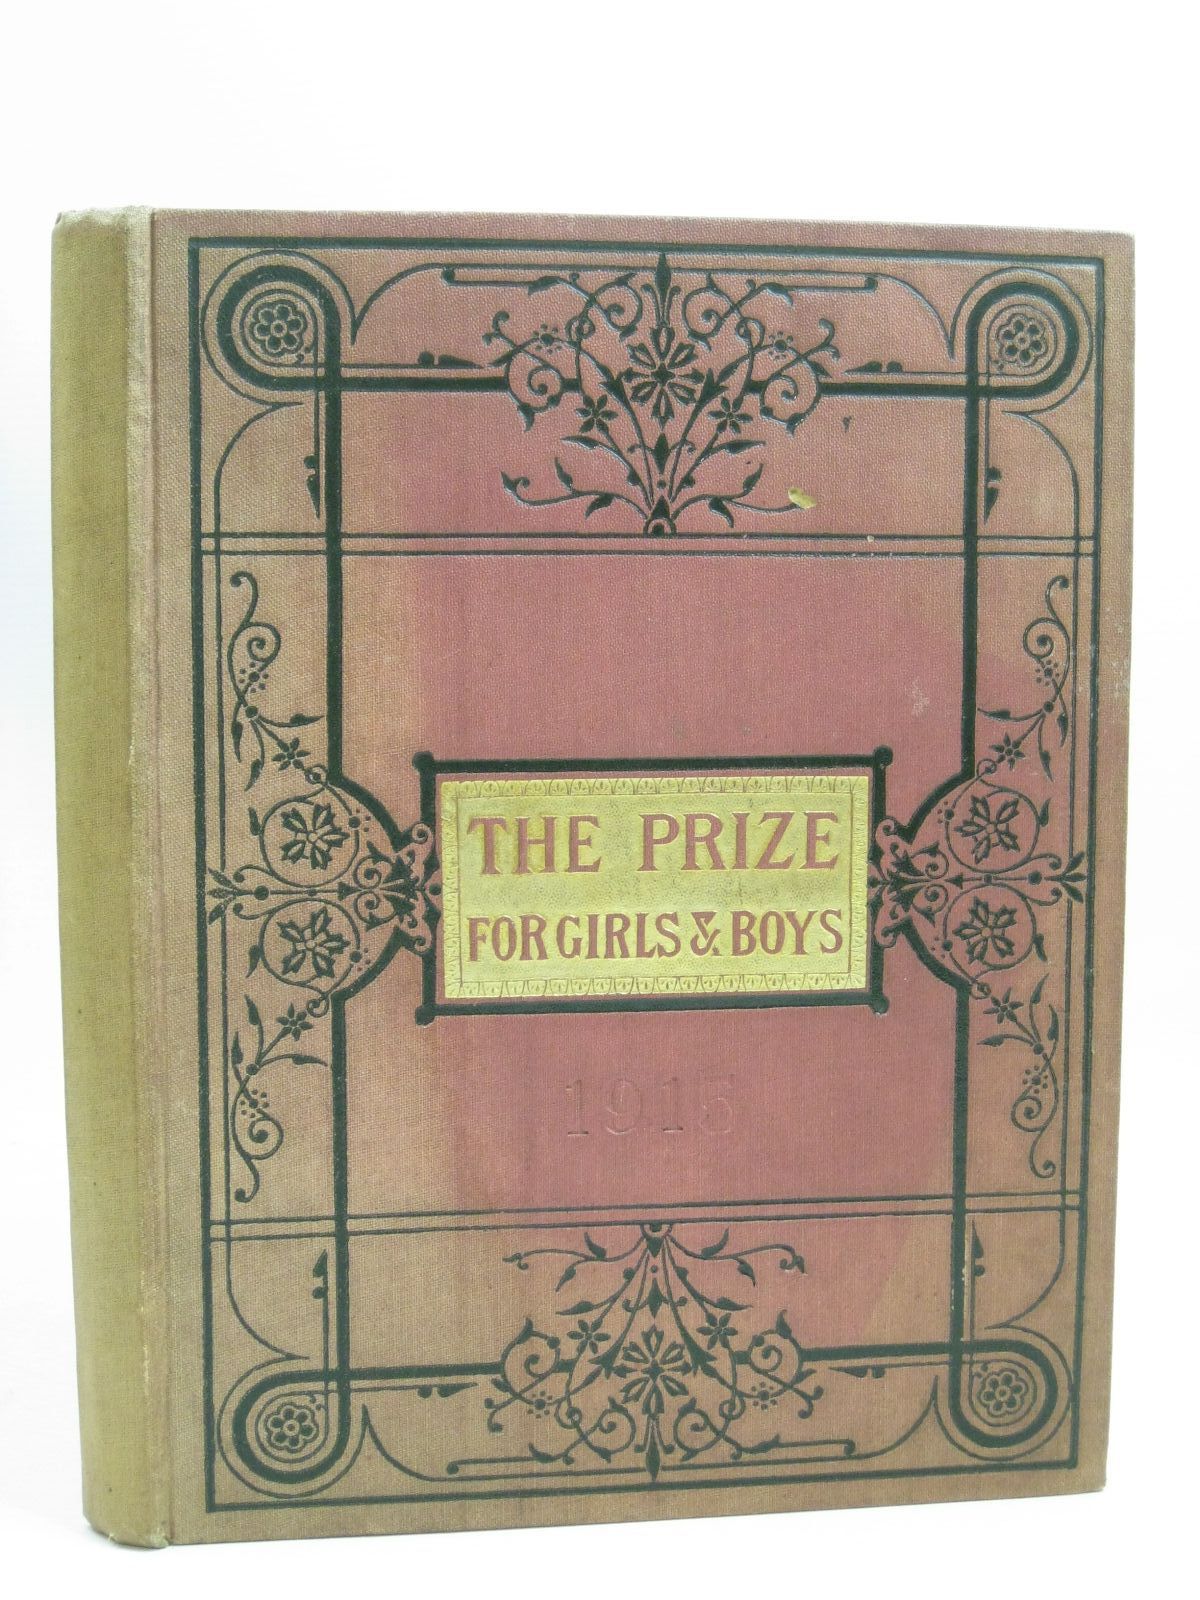 Photo of THE PRIZE FOR GIRLS AND BOYS 1915 published by Wells Gardner, Darton & Co. Ltd. (STOCK CODE: 1506238)  for sale by Stella & Rose's Books